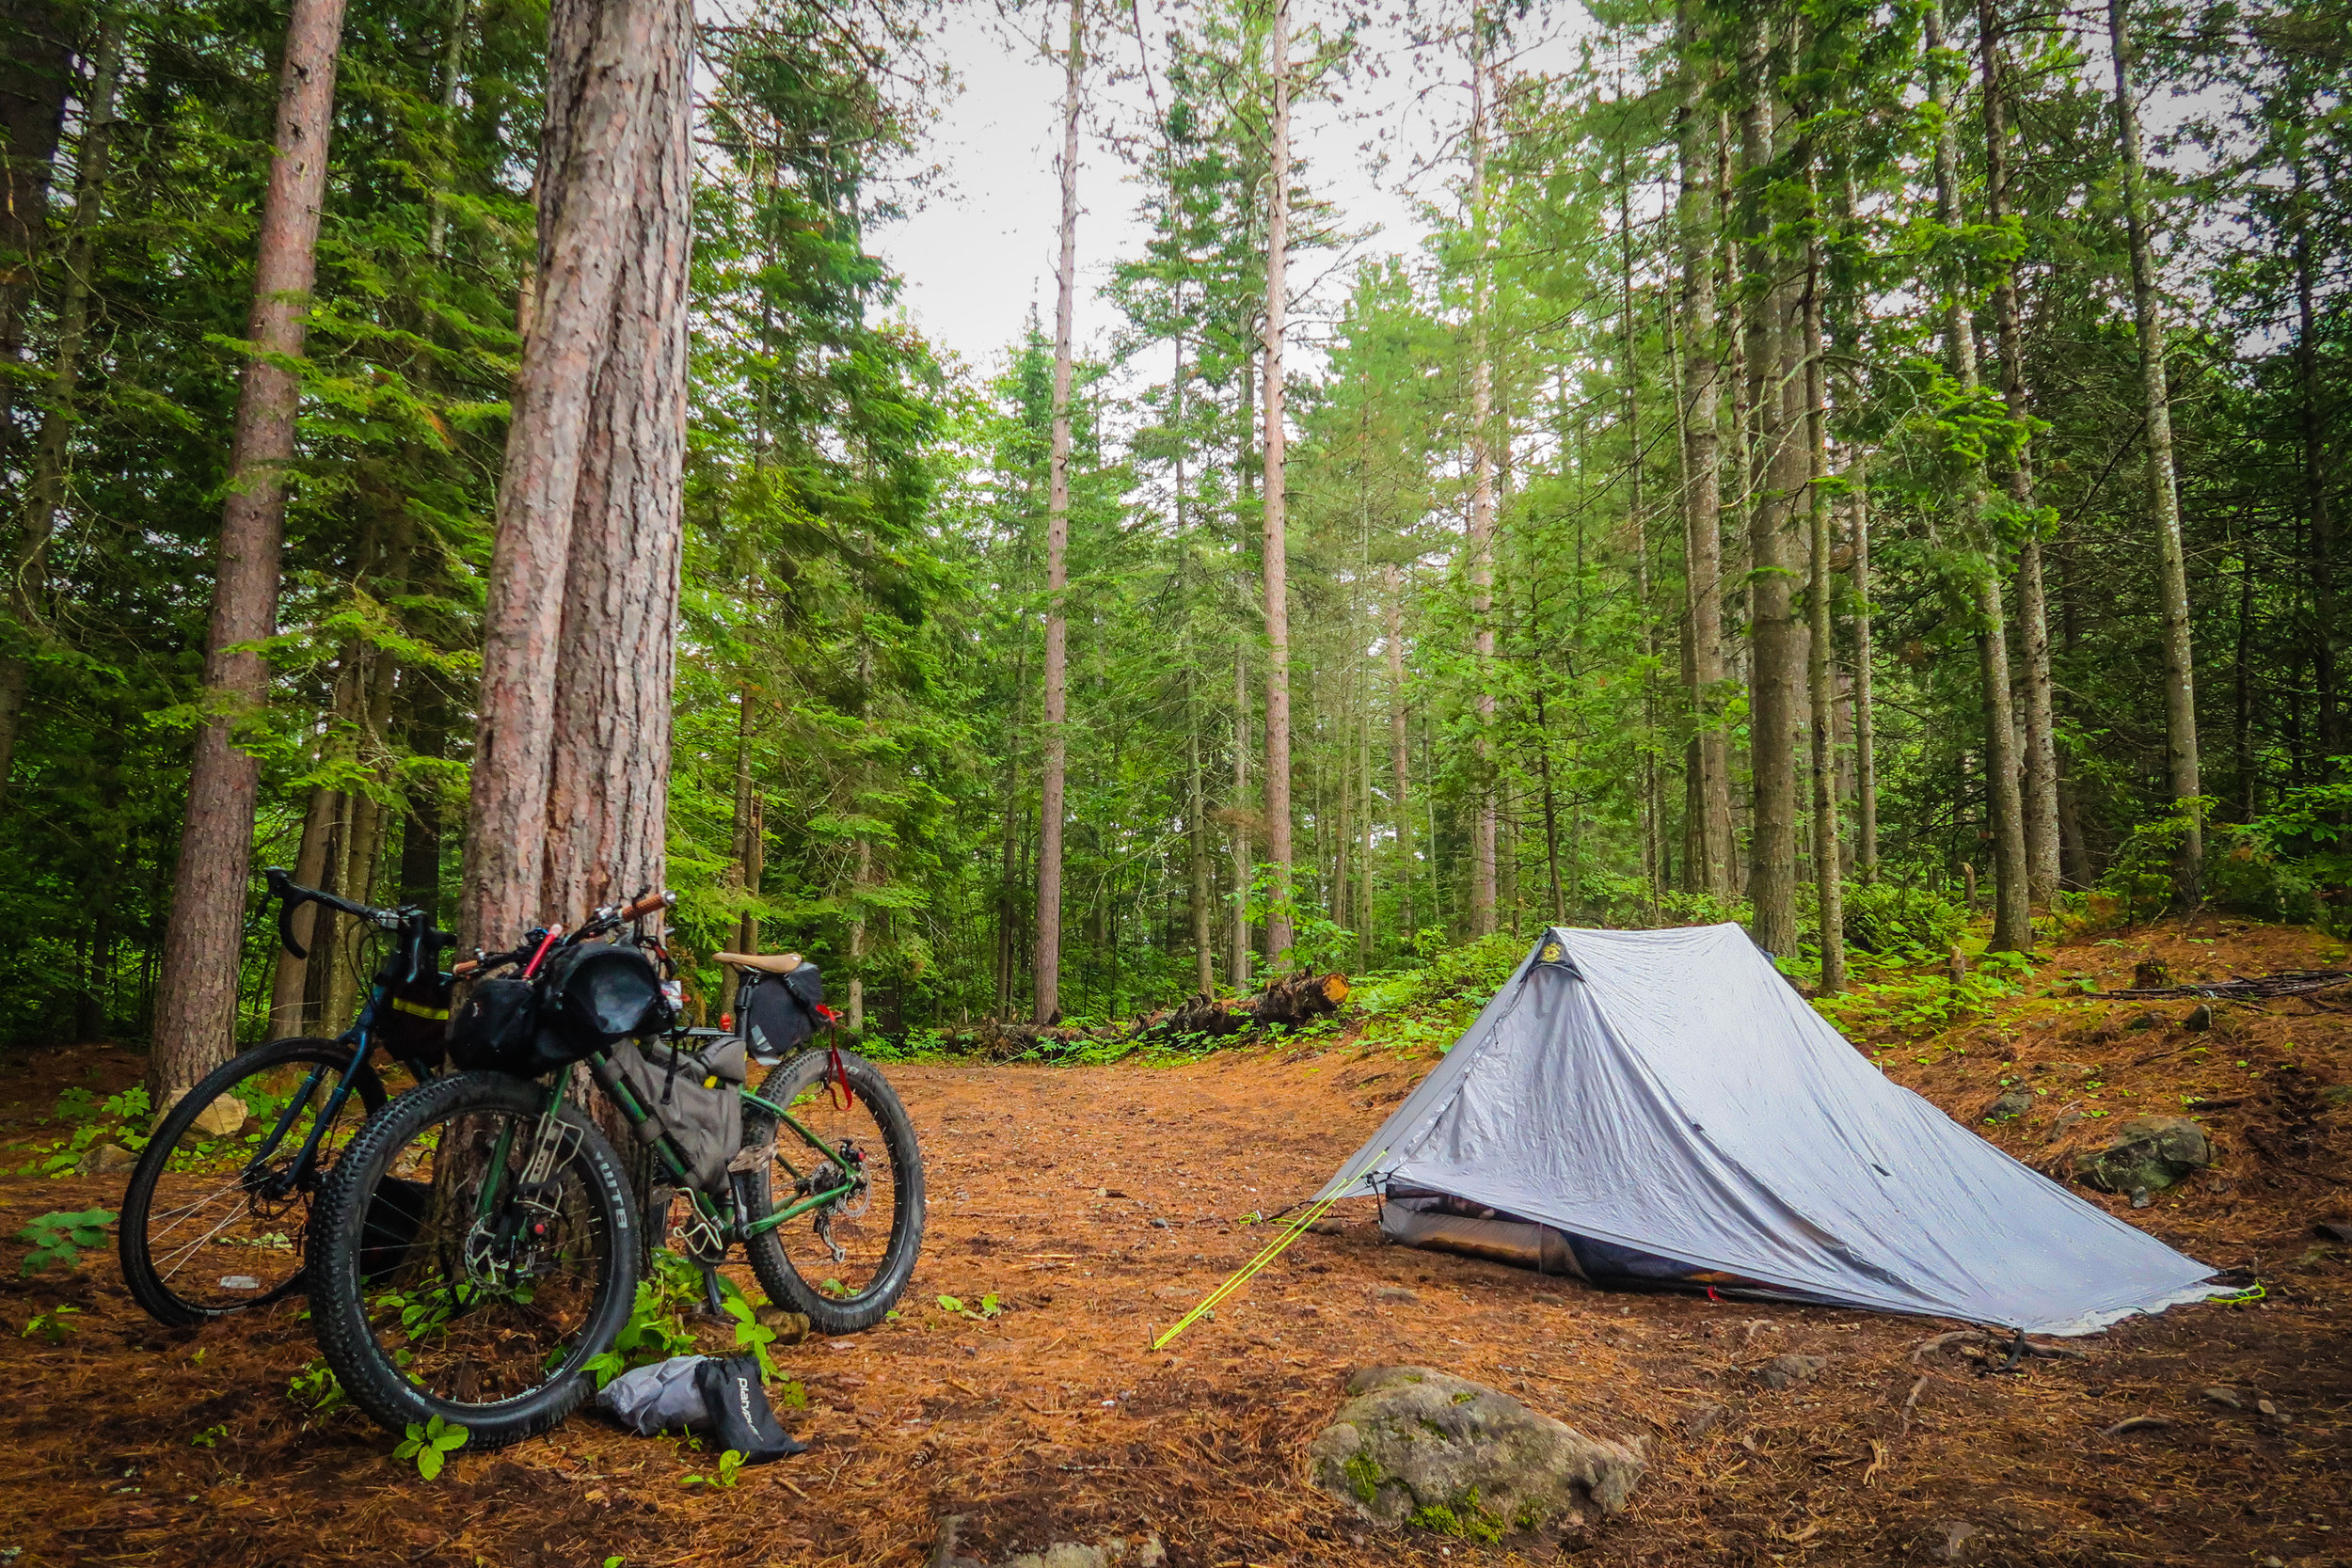  Free Crown land campsites are abundant along most of the route. Remember to leave no trace. 